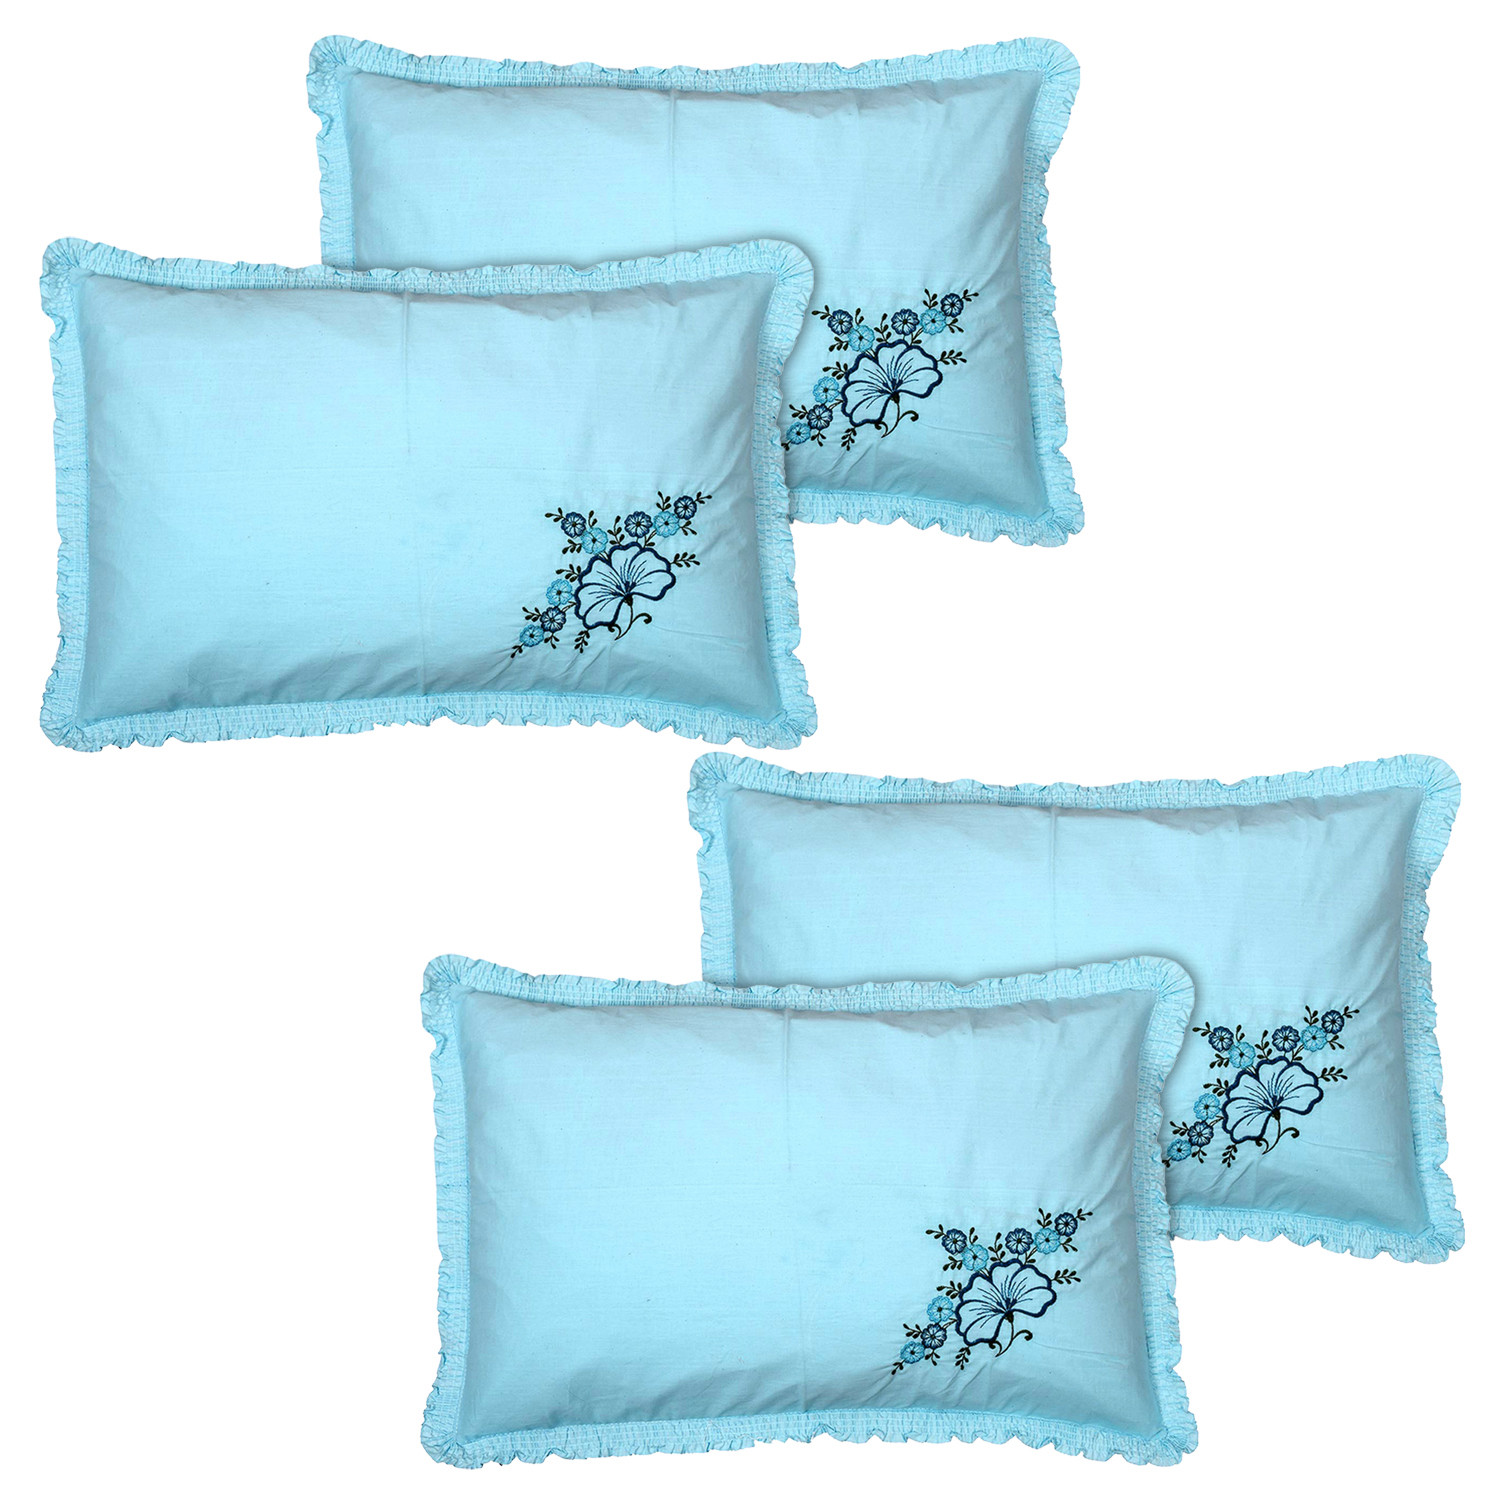 Kuber Industries Embroidery Pattern Breathable & Soft Cotton Pillow Cover For Sofa, Couch, Bed,(Blue) 54KM4110